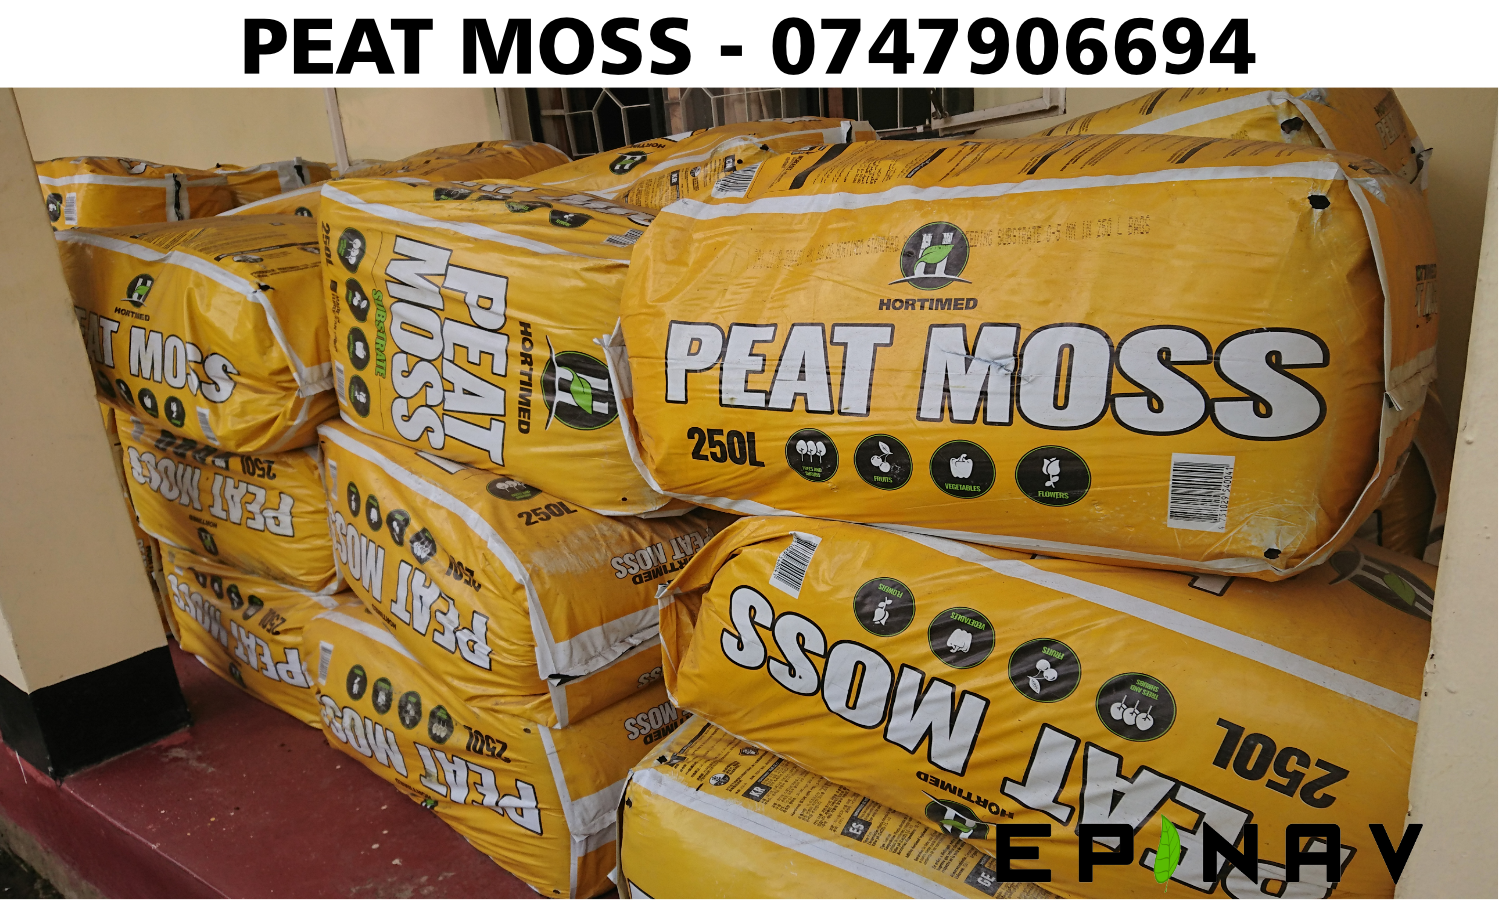 The planting soil Peat Moss Packed in 50Kg